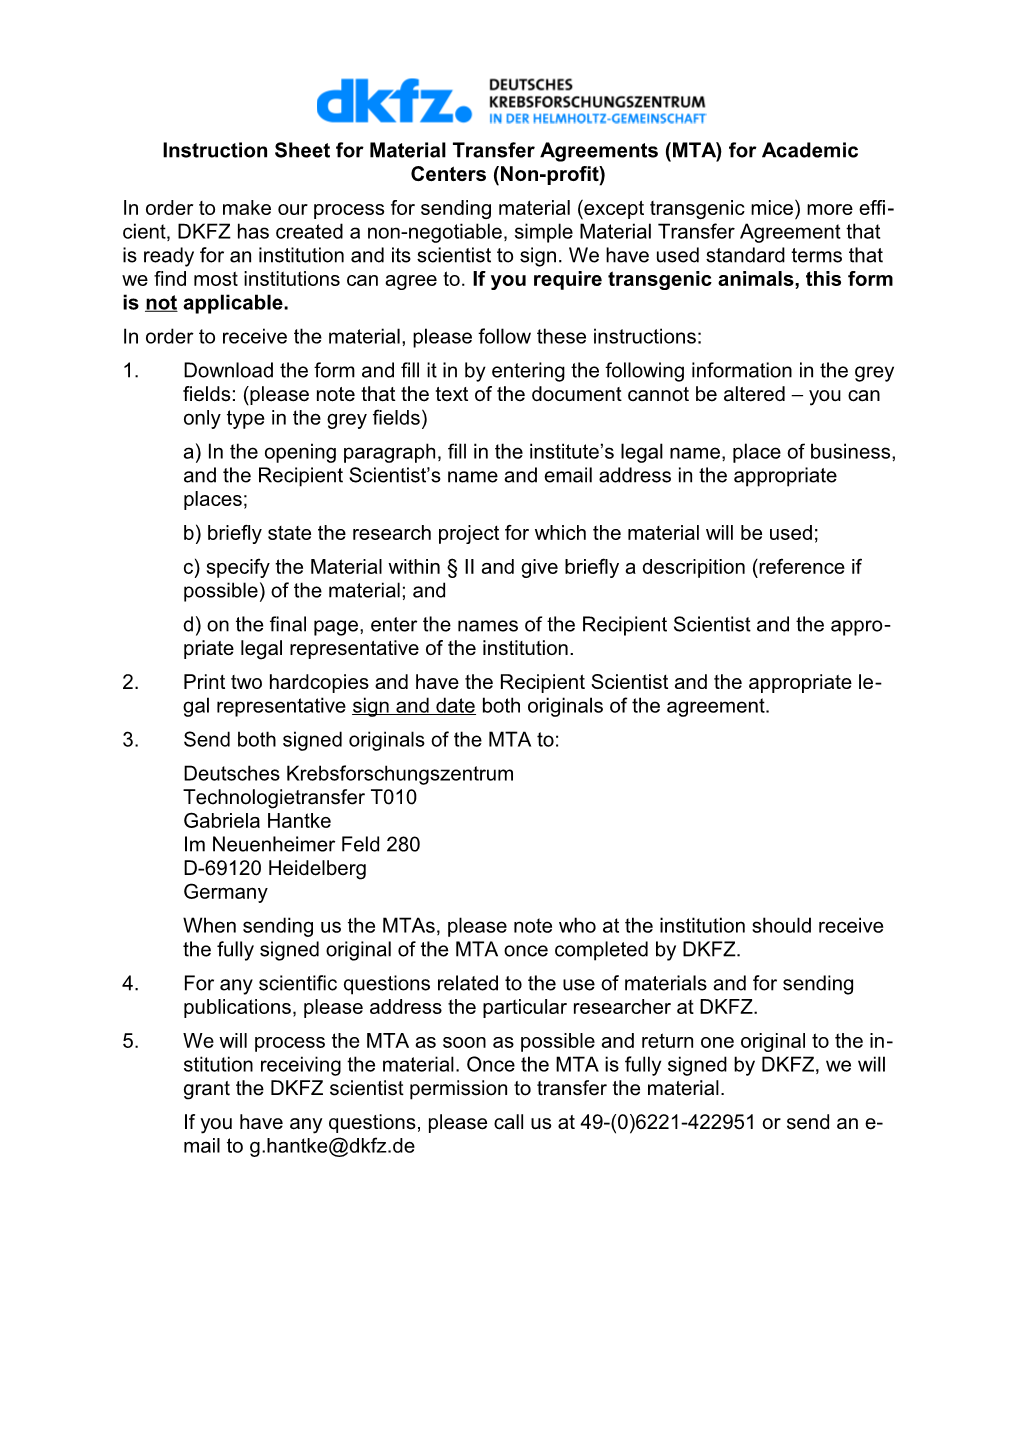 Instruction Sheet for Material Transfer Agreements (MTA) for Academic Centers (Non-Profit)